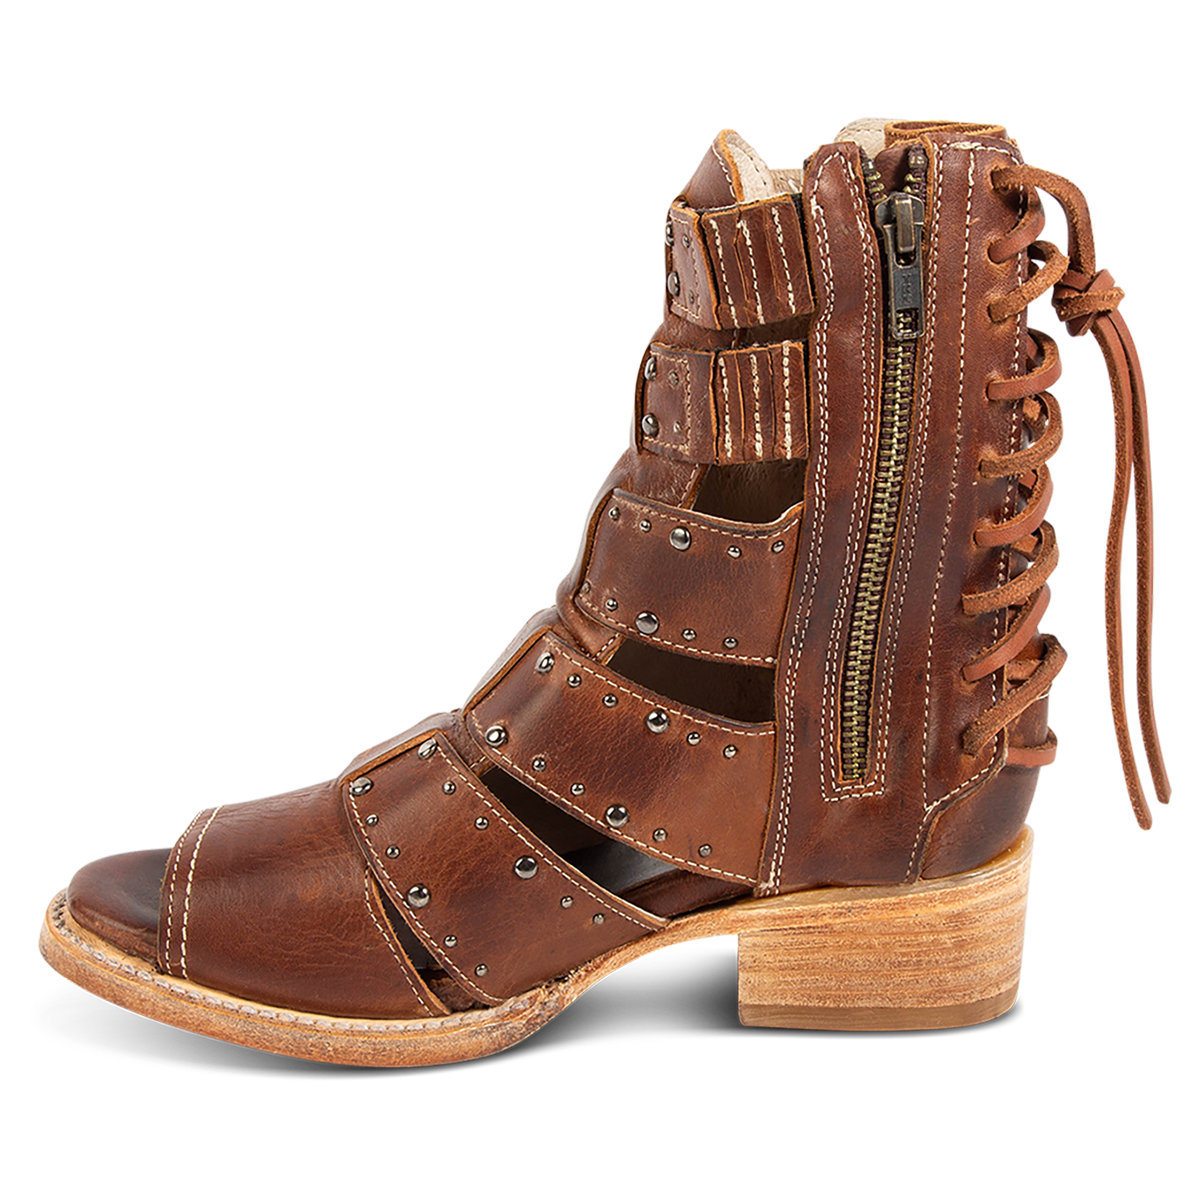 Inside view showing FREEBIRD women's Ghost tan leather sandal with an inside working brass zipper, back panel lacing and an exposed exterior